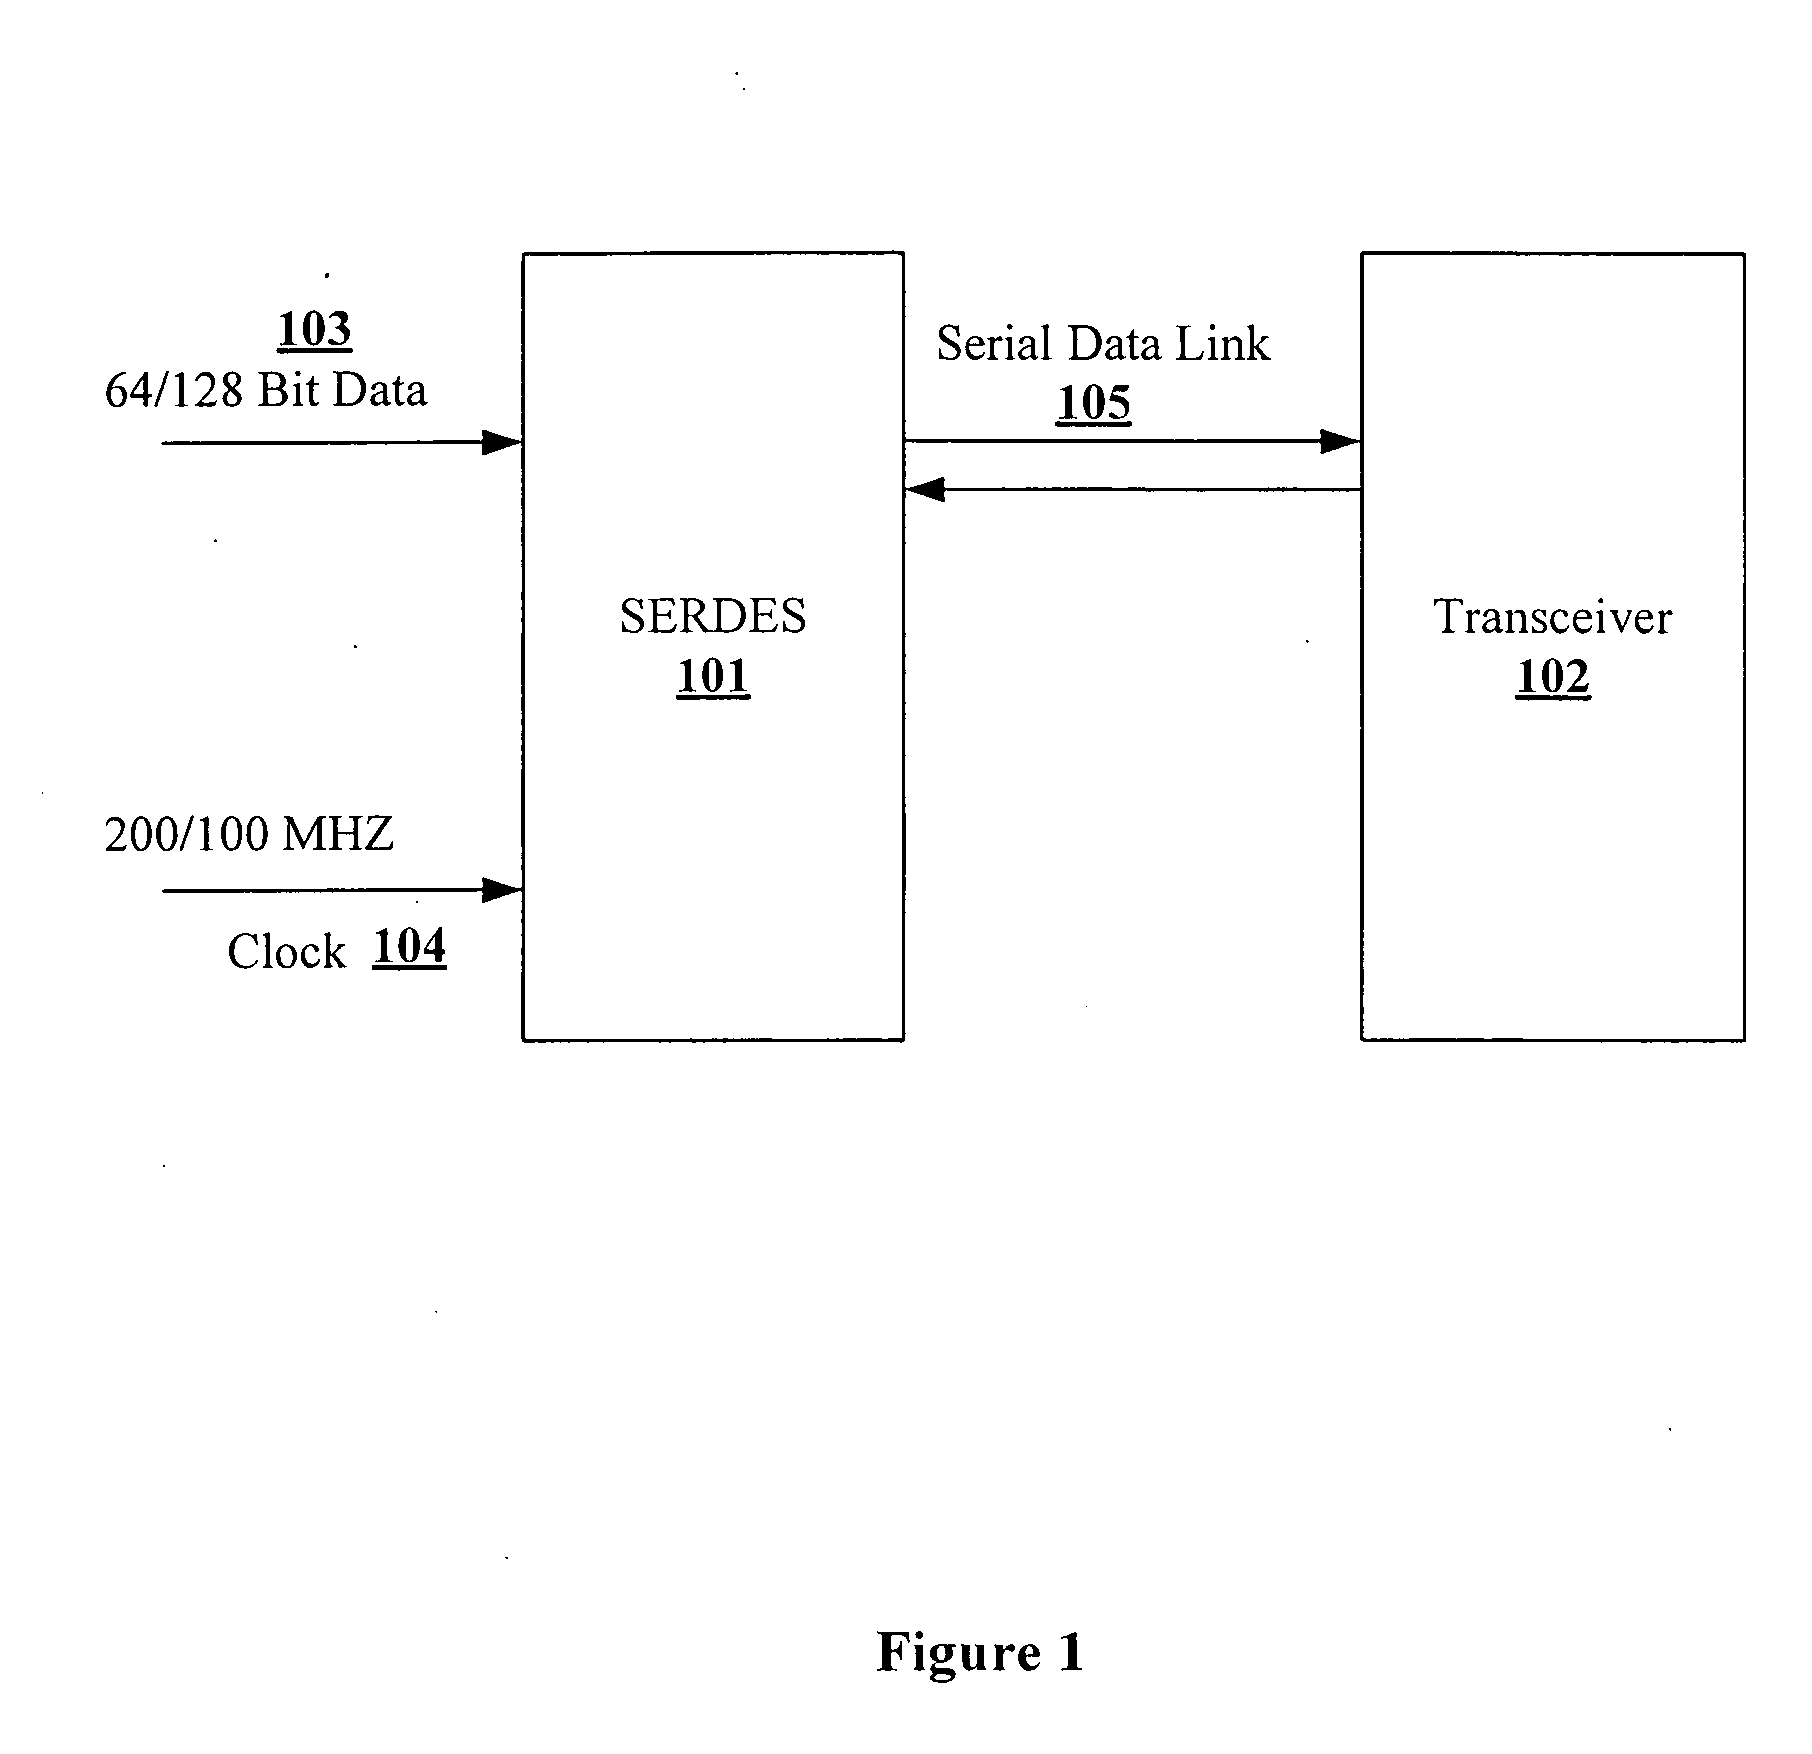 Multi-mode management of a serial communication link